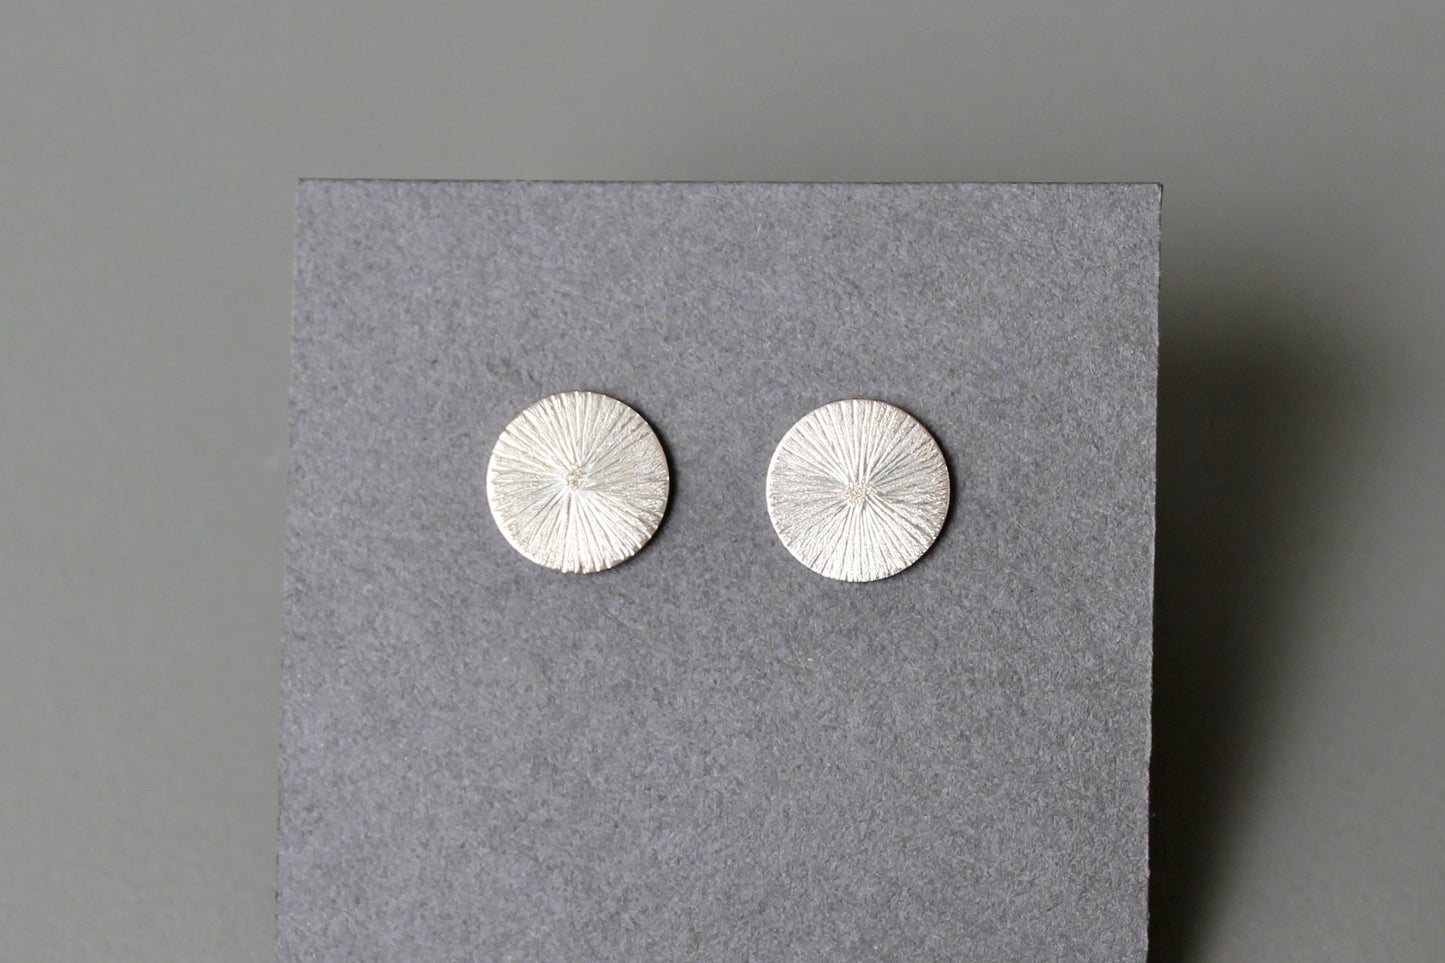 beautiful ear studs sterling silver with hammered sun design